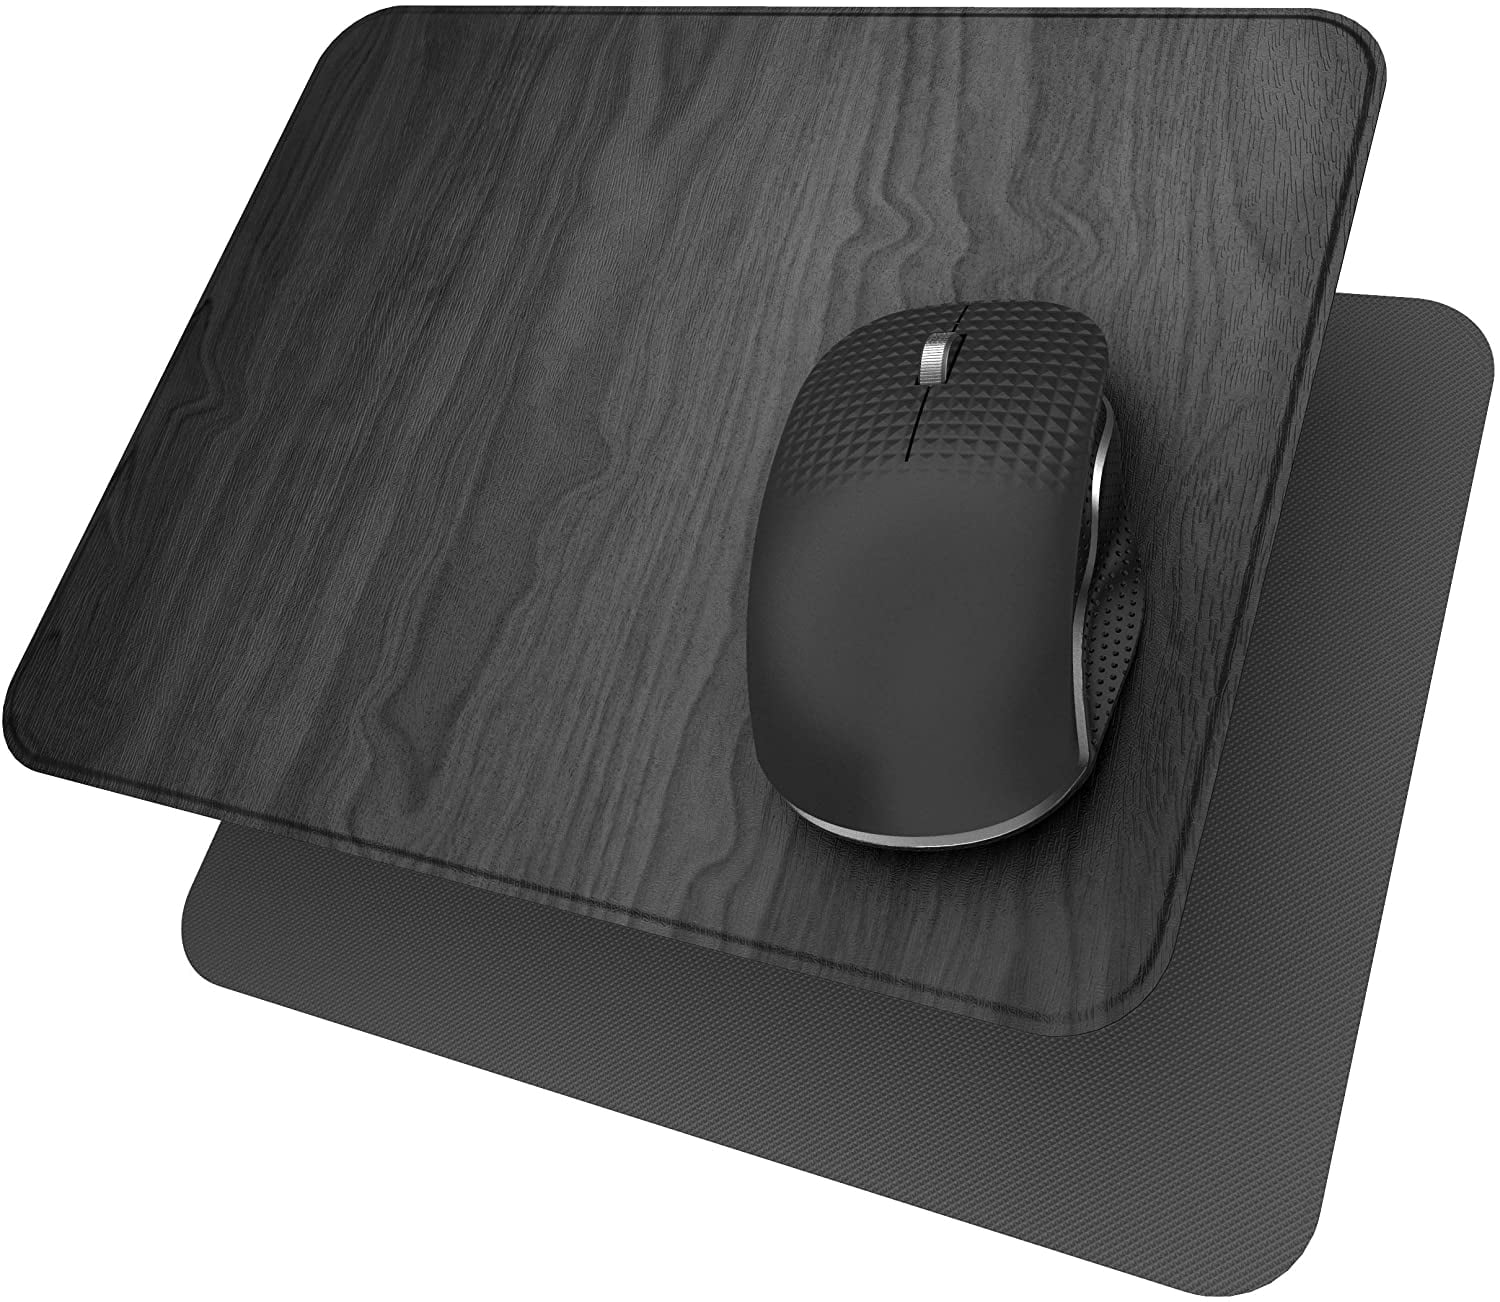 Black Kriture Mouse Pad 4 Pack with Stitched Edge 3mm Non-Slip Rubber Base Laptop Premium-Textured and Waterproof Mousepad for Computers Office & Home 10.2x8.3inches 